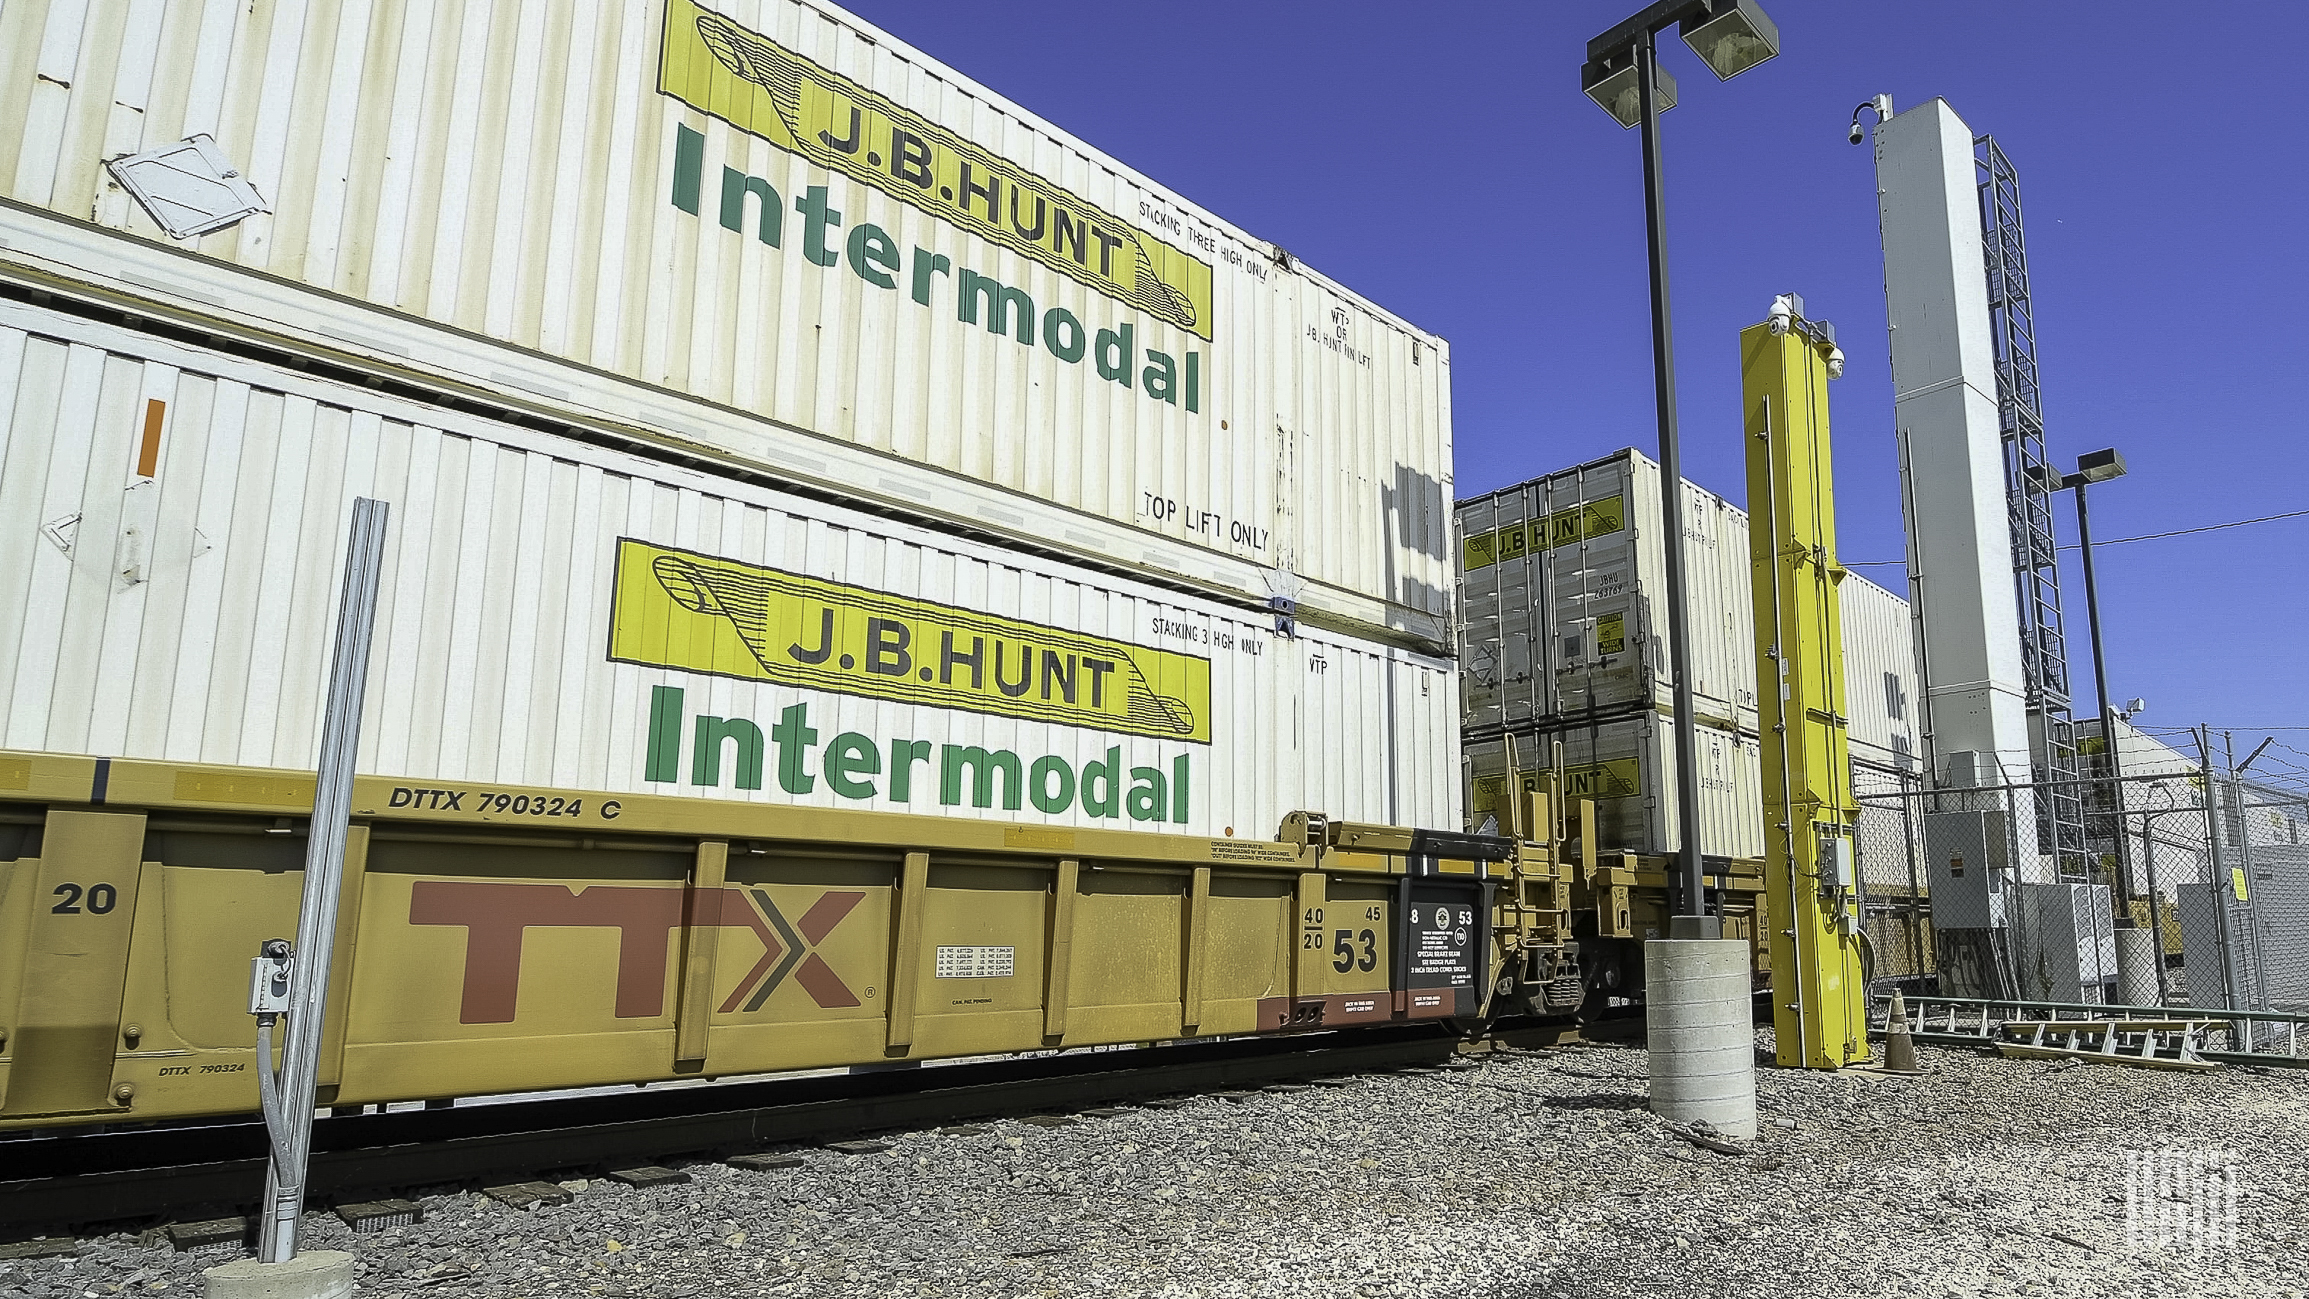 Intermodal service issues to linger